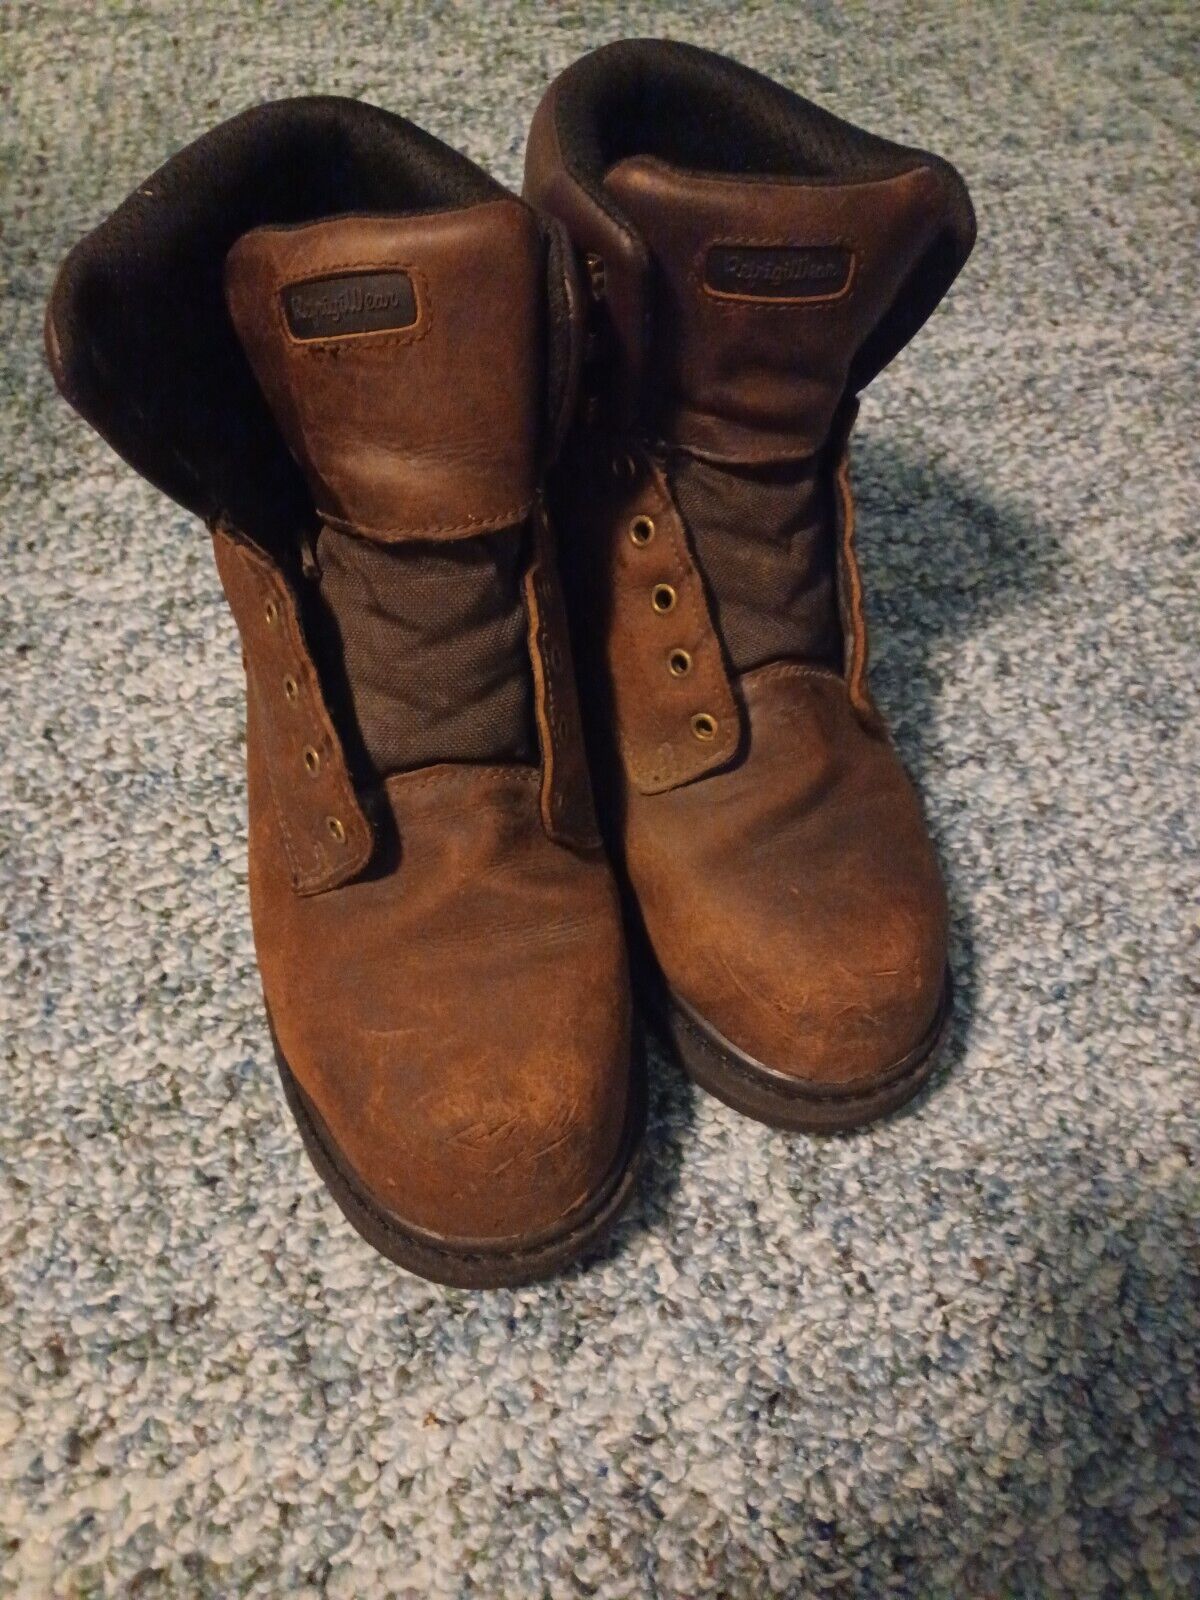 Refrigiwear Boots size 10.5 Style 120cr Leather s… - image 1